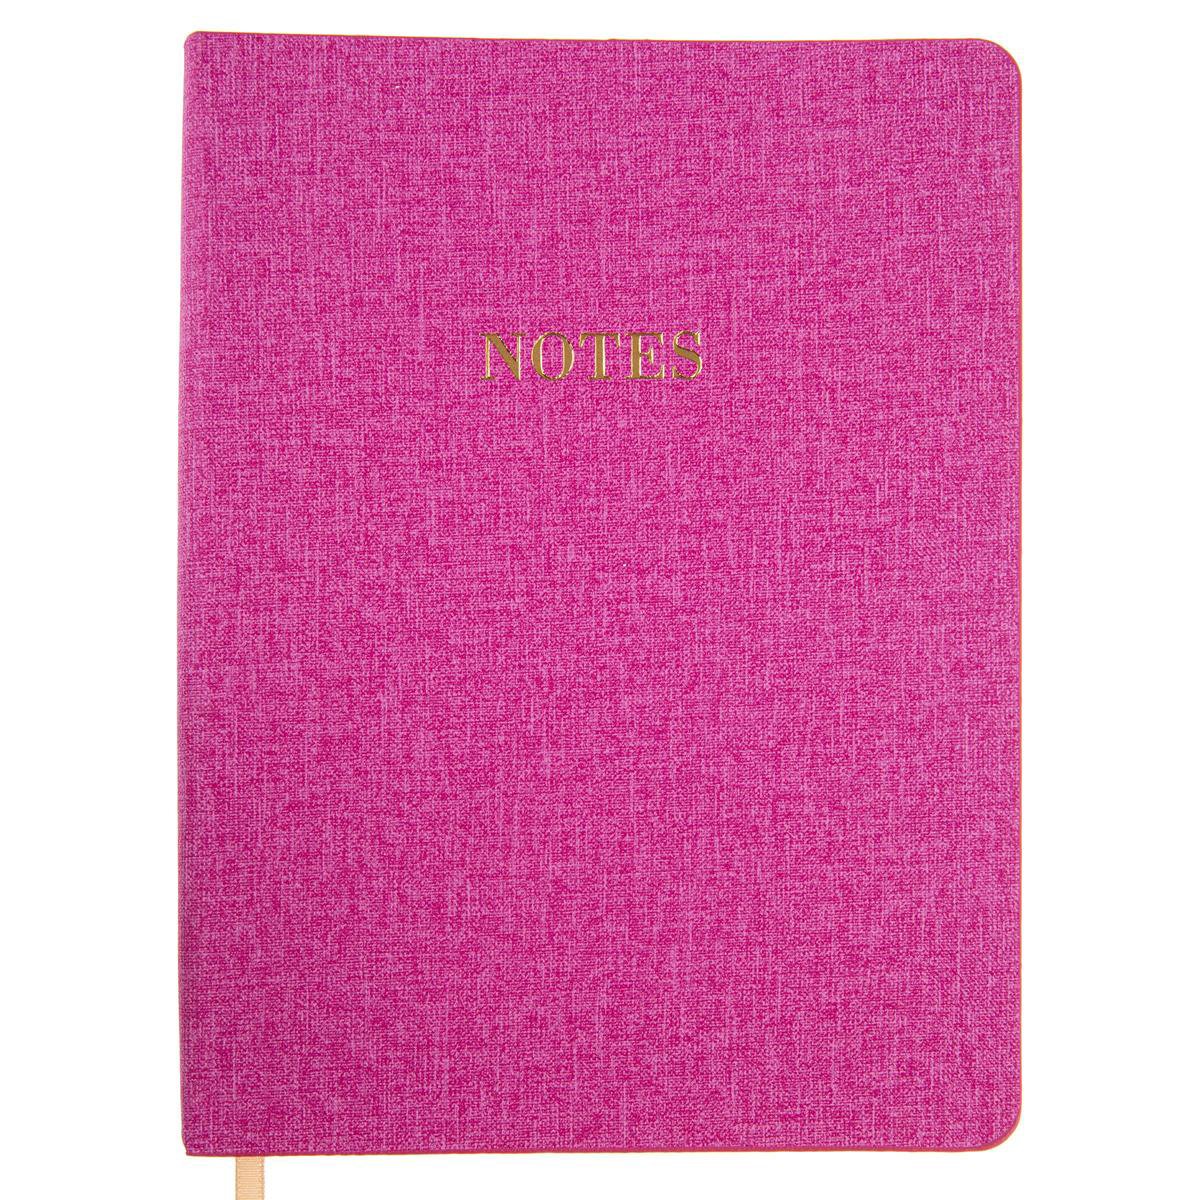 Faux Leather Journal Pink Notitieboek